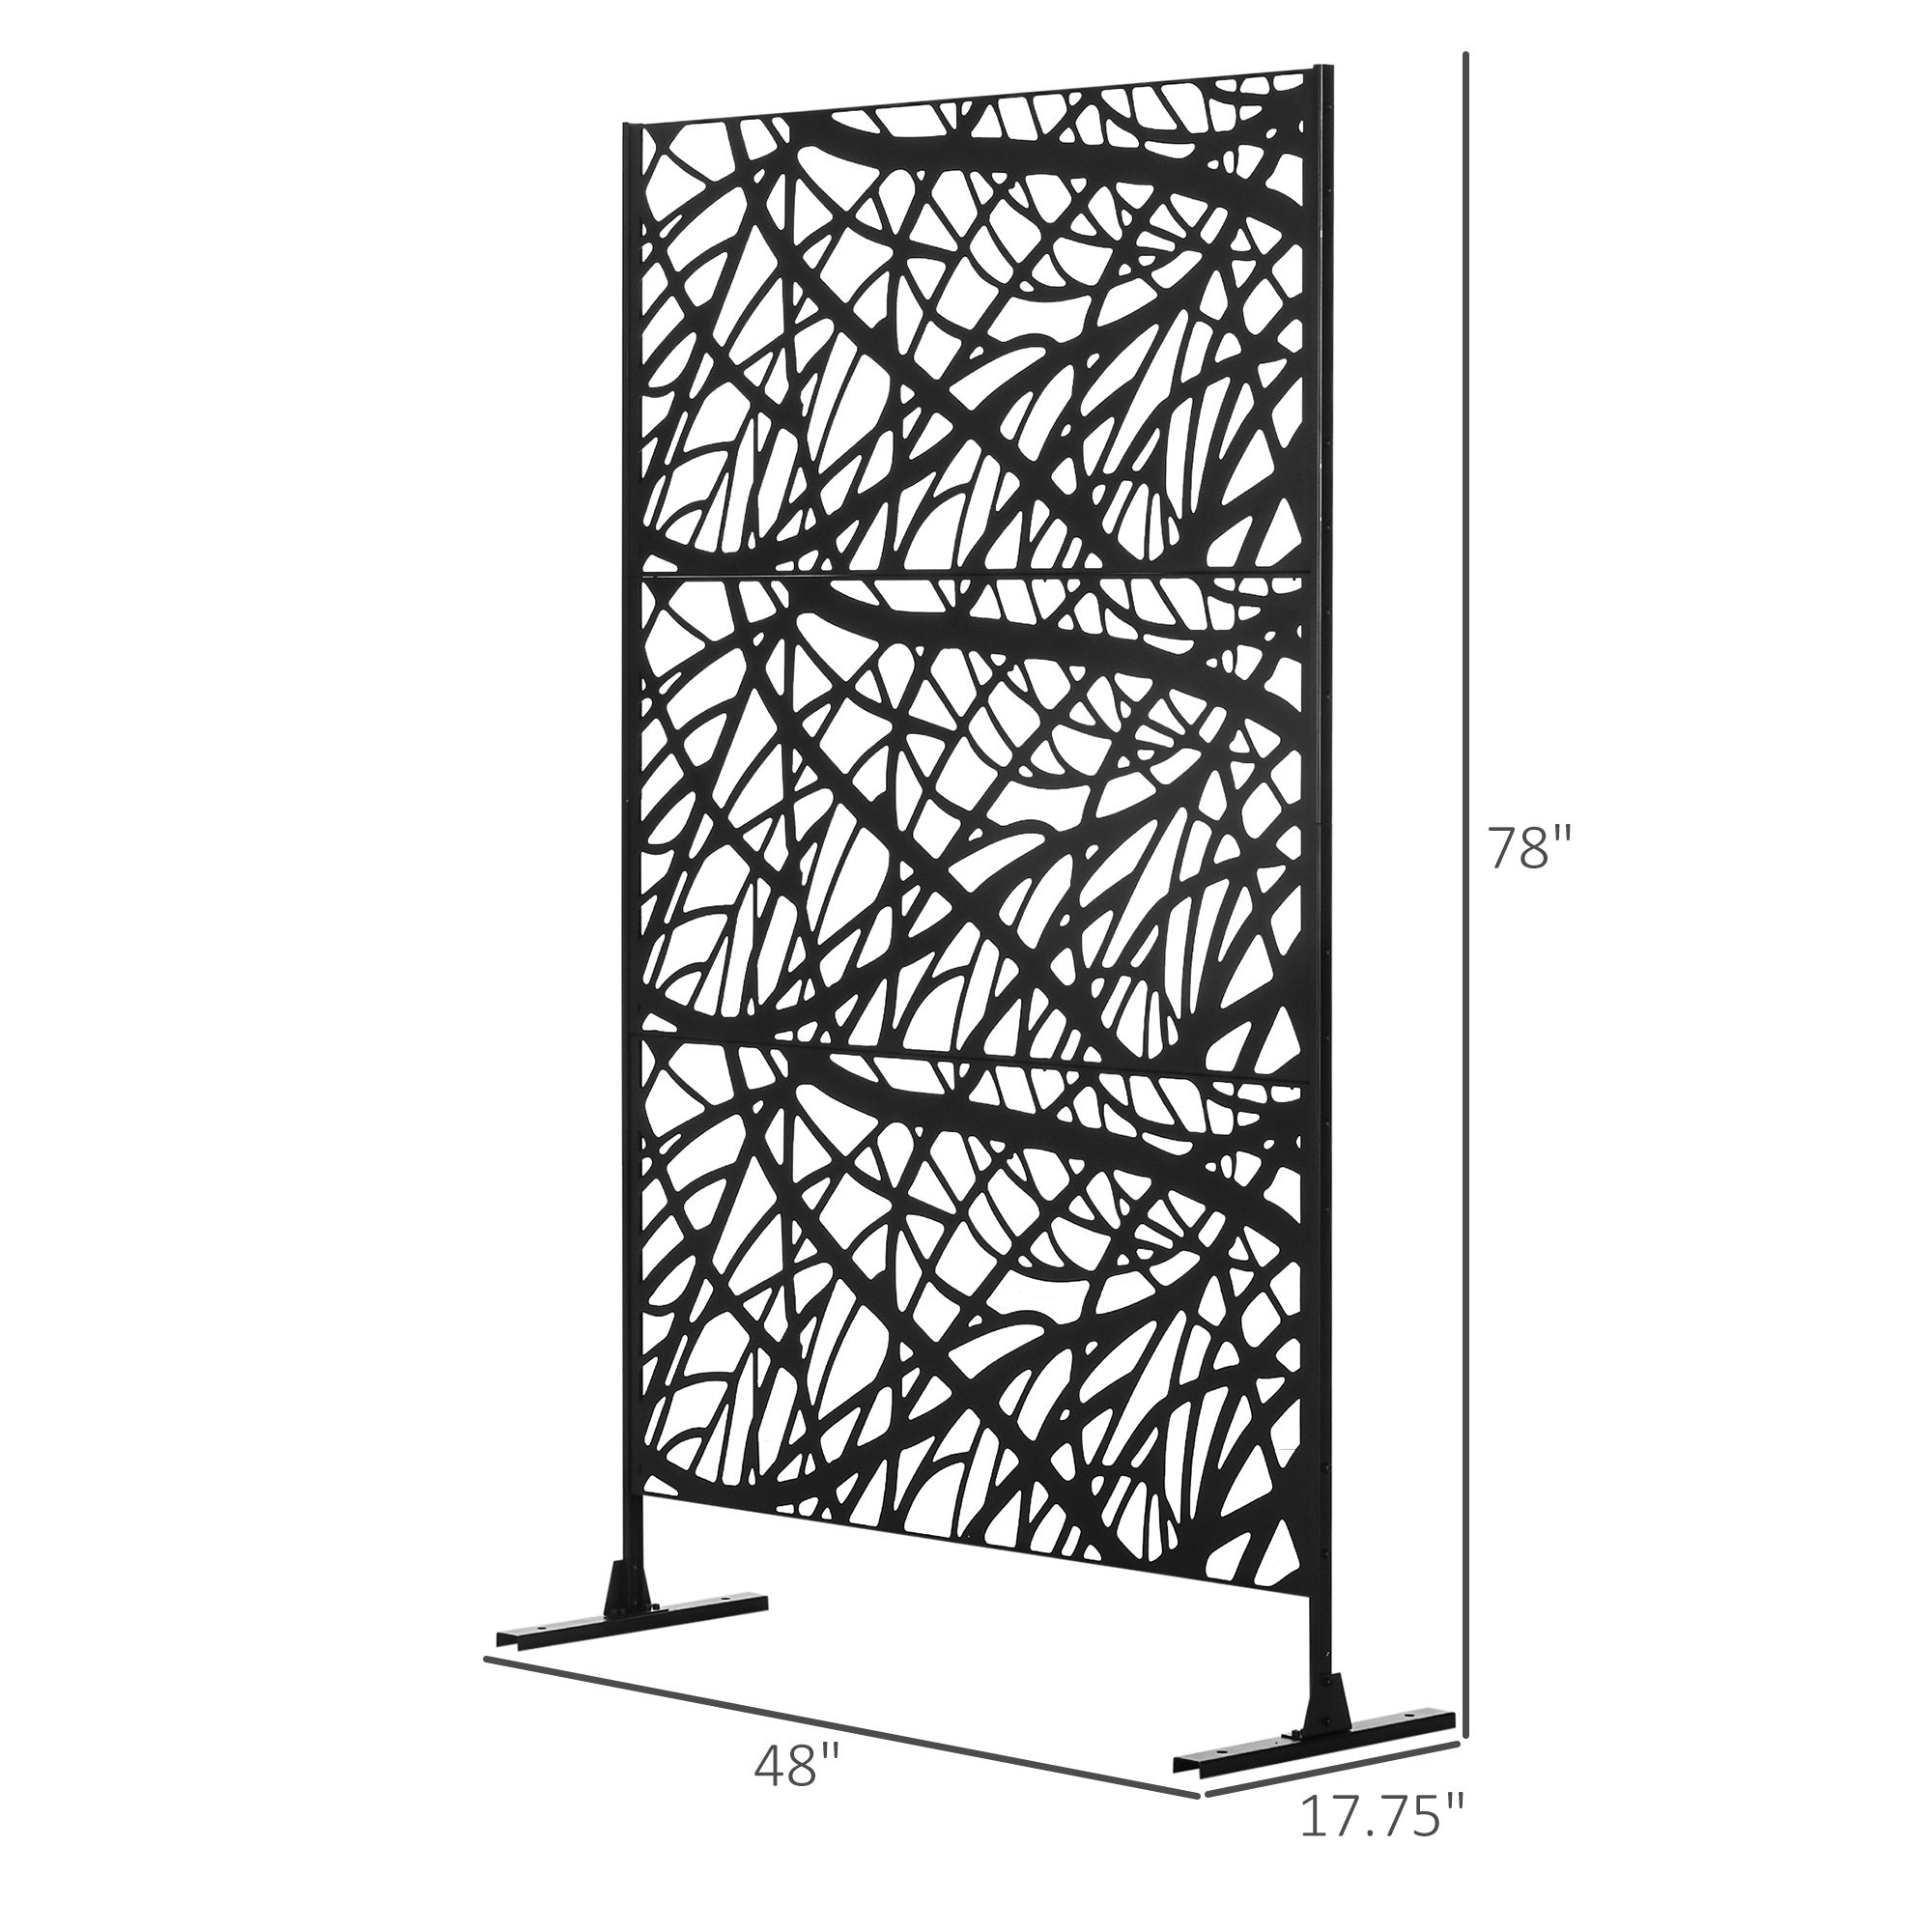 Outsunny Decorative Outdoor Privacy Screen, See